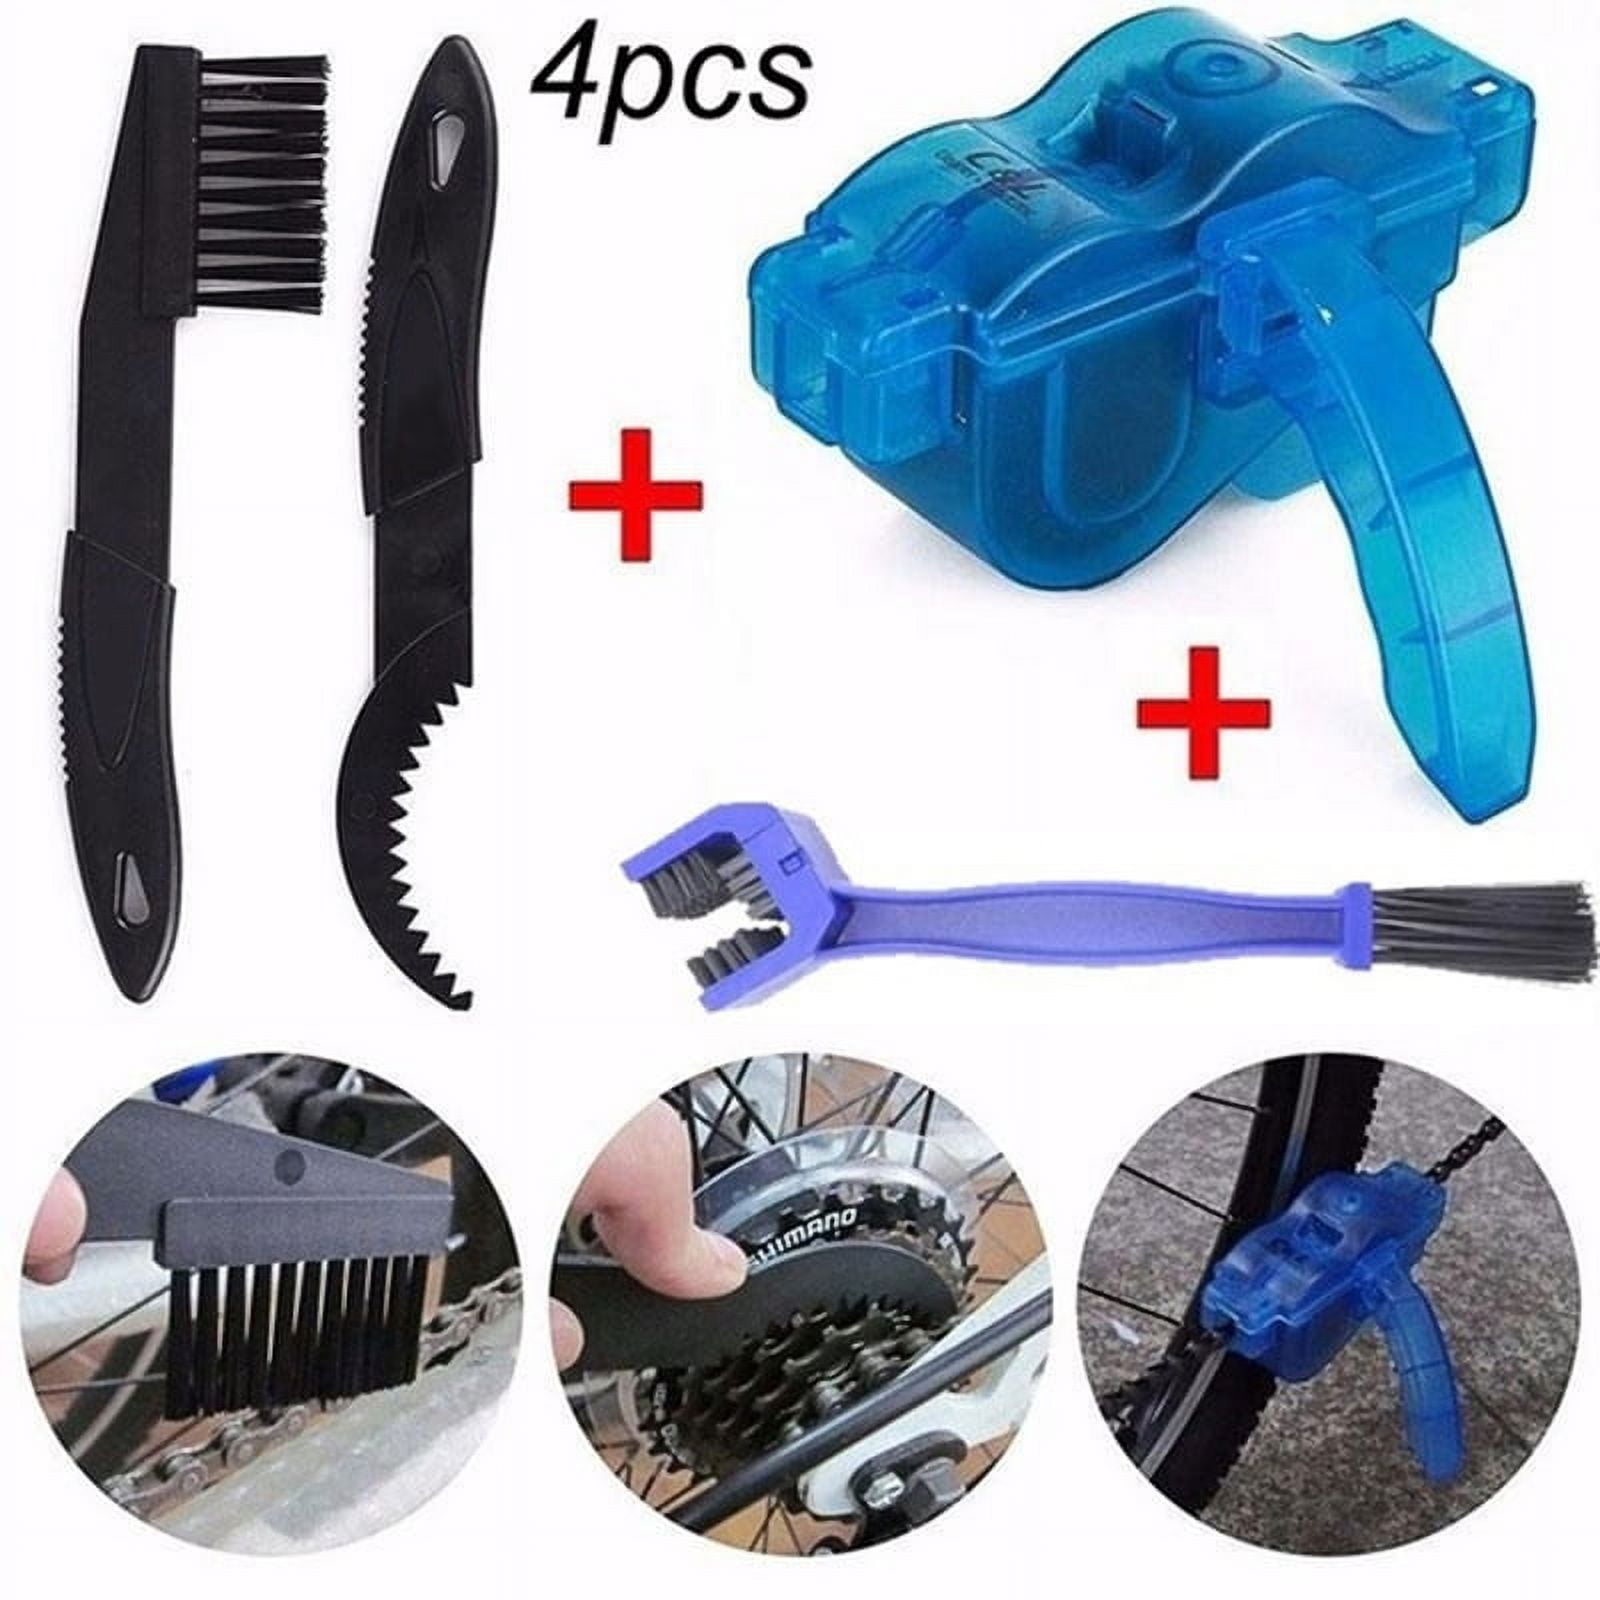 QIWYGPYQ Chain Cleaning Brush ,4 Pcs Motorcycle Bike Chain Cleaner Brush,for Gears Chains Maintenance Cleaning Brush Cleaner Tools (Blue + Red)